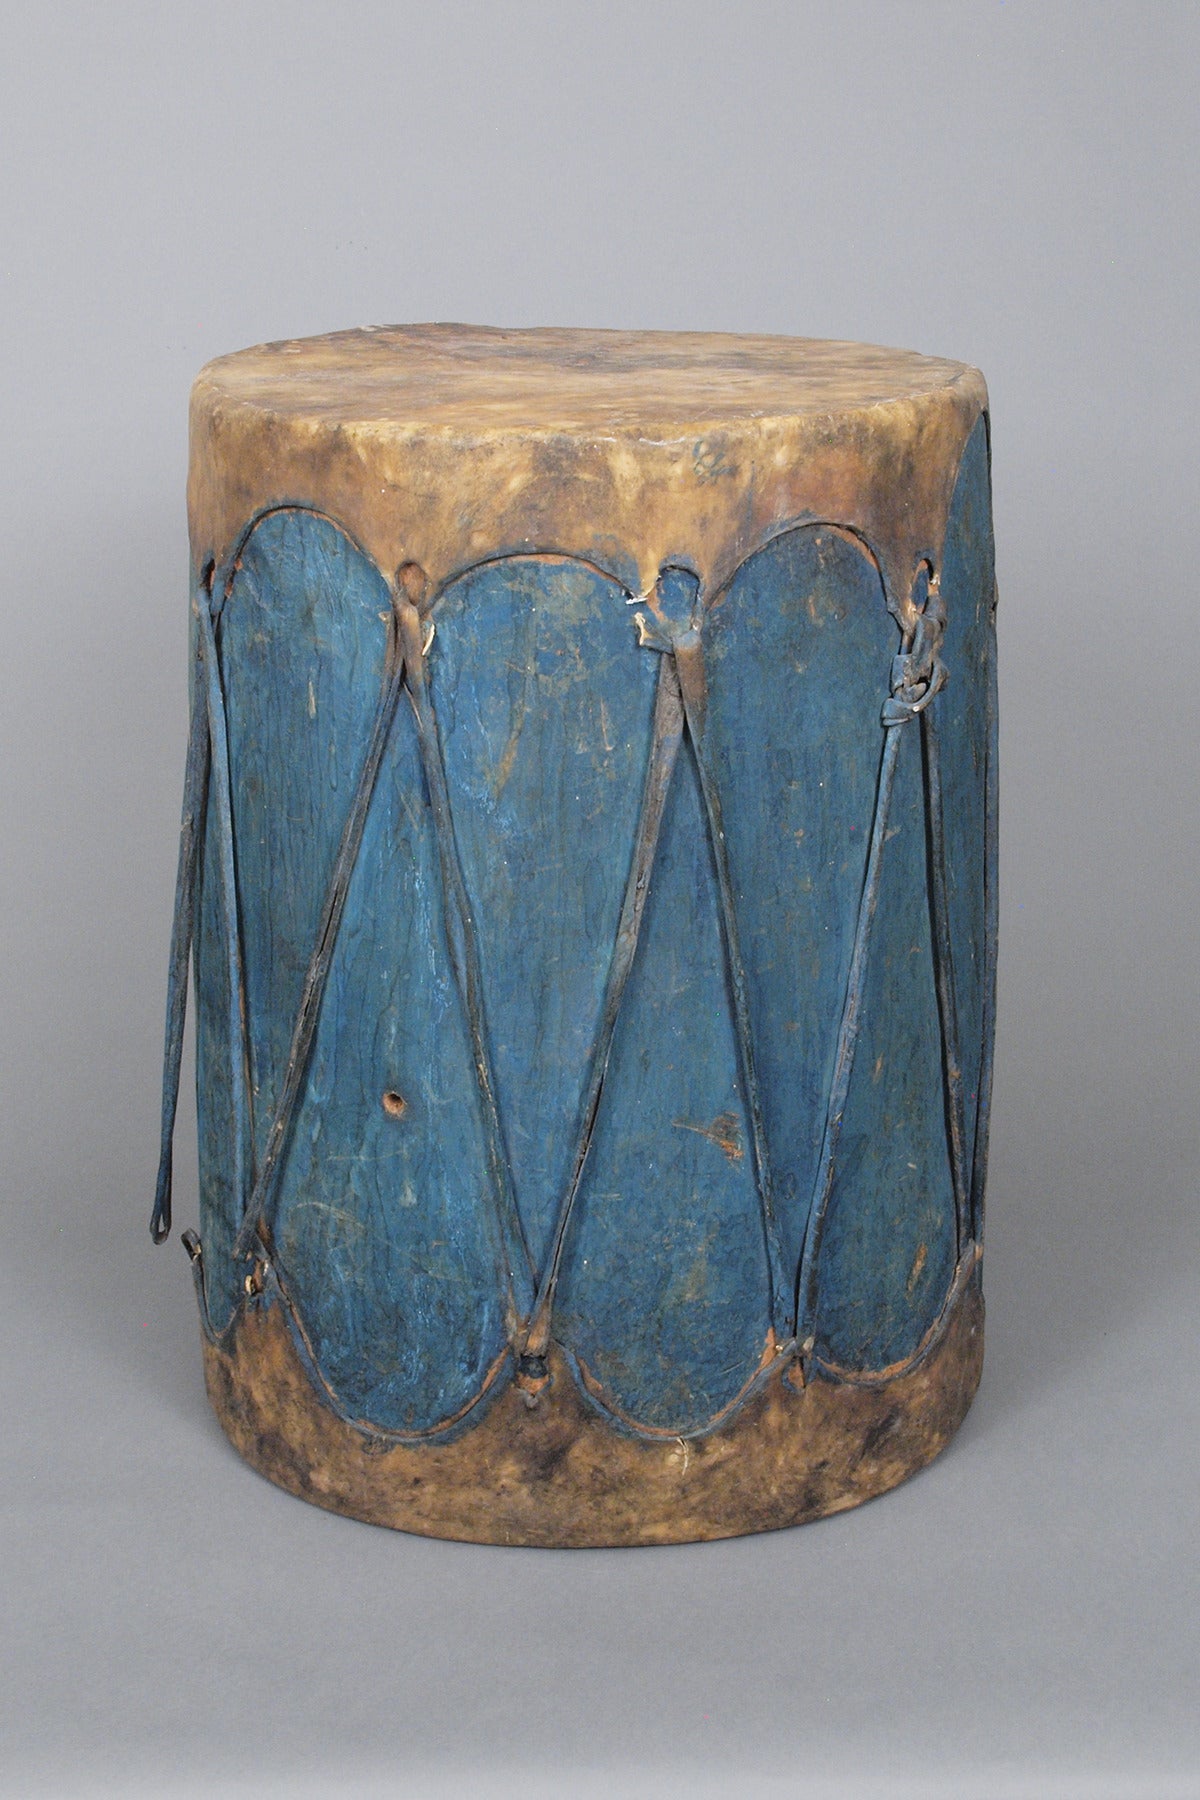 A large traditional Pueblo drum constructed of wood with stretched rawhide and vegetal paint.